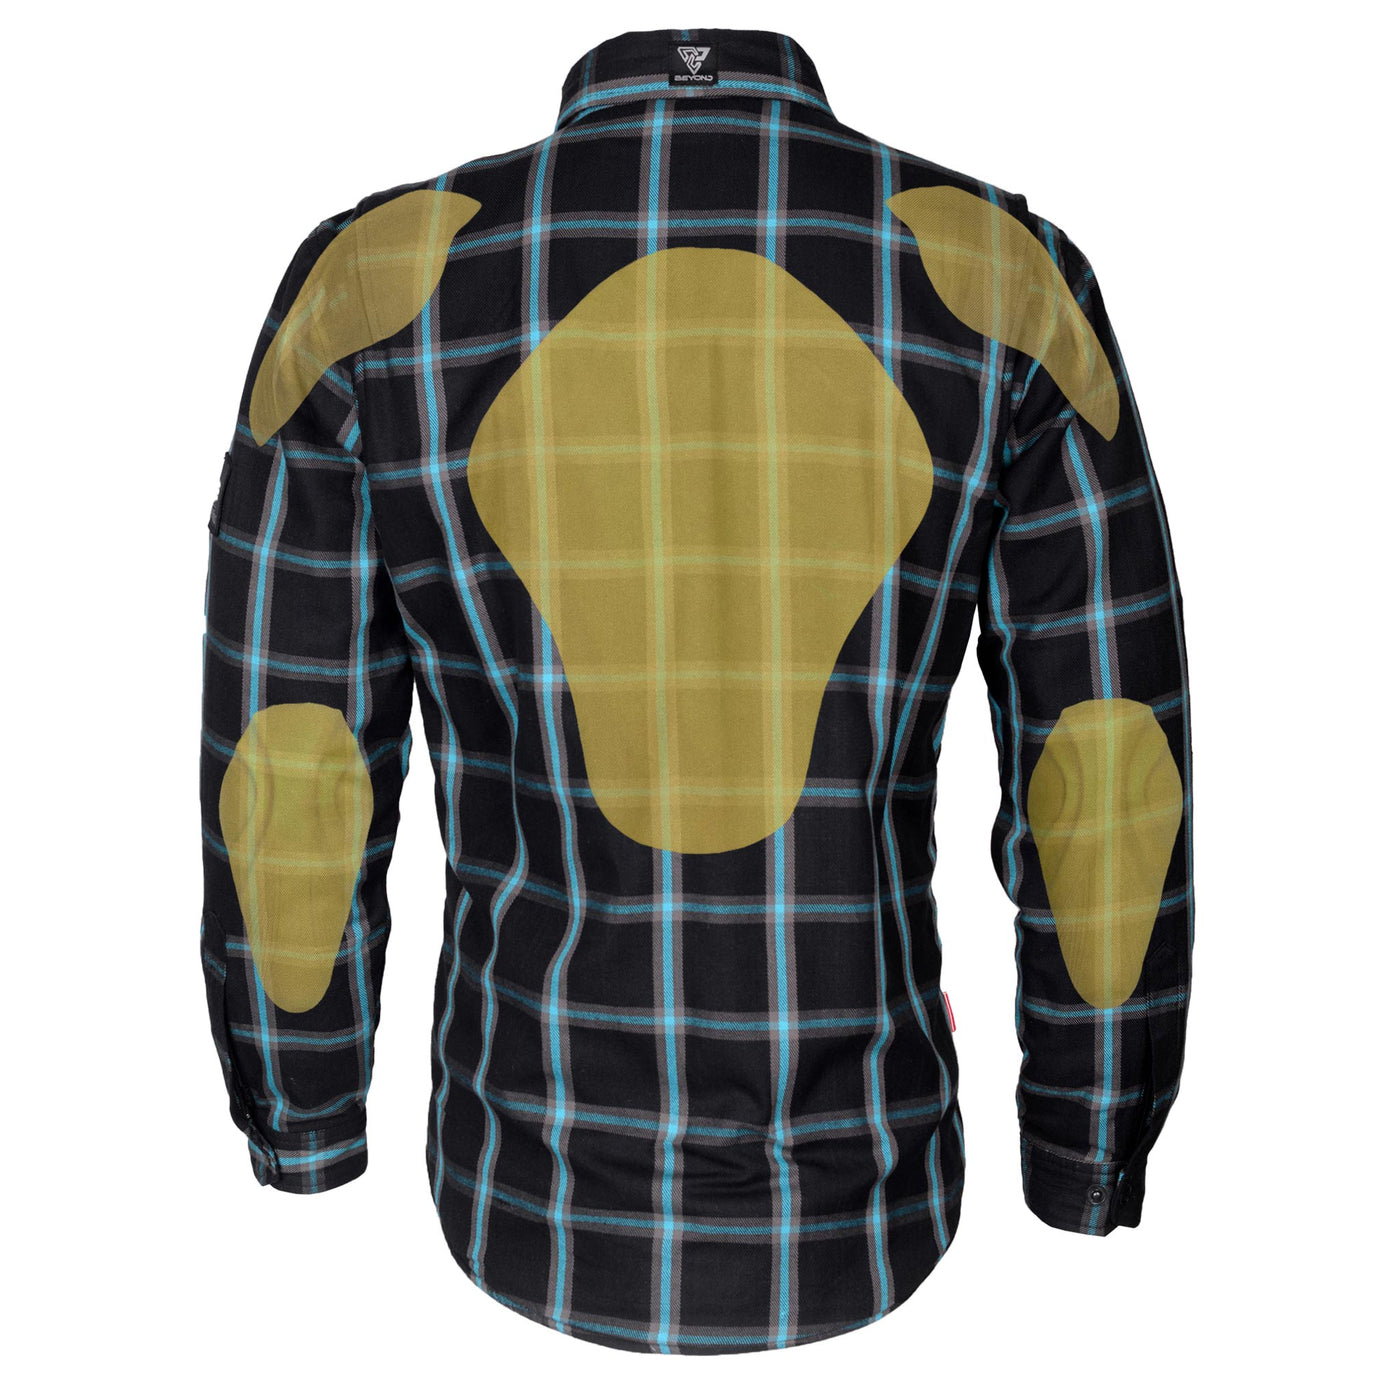 Protective Flannel Shirt with Pads "Blue Bypass" - Black and Blue Stripes